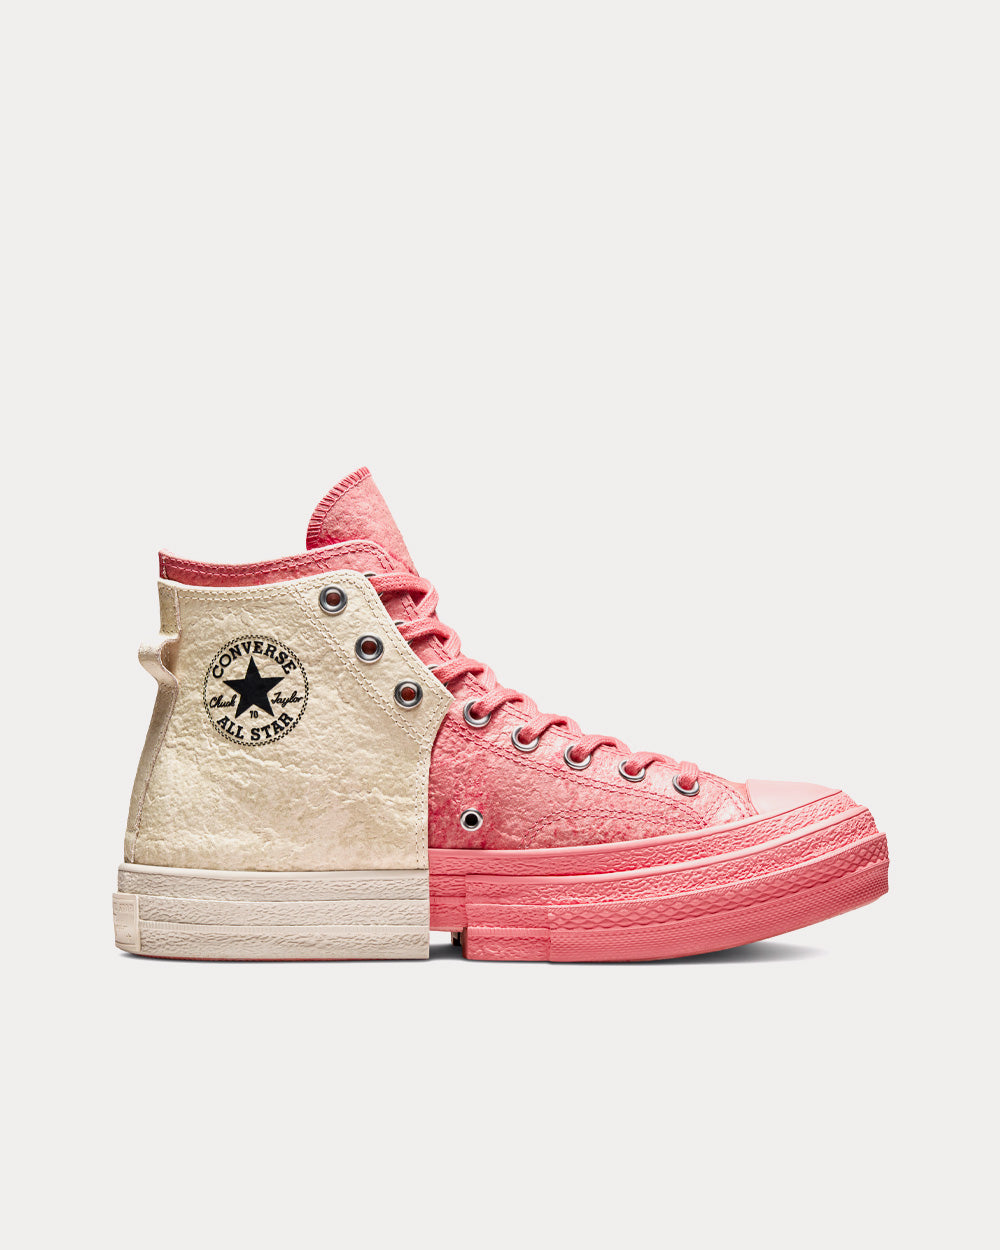 Converse x Feng Chen Wang - 2 in 1 Chuck 70 Quartz Pink / Strawberry Ice High Top Sneakers